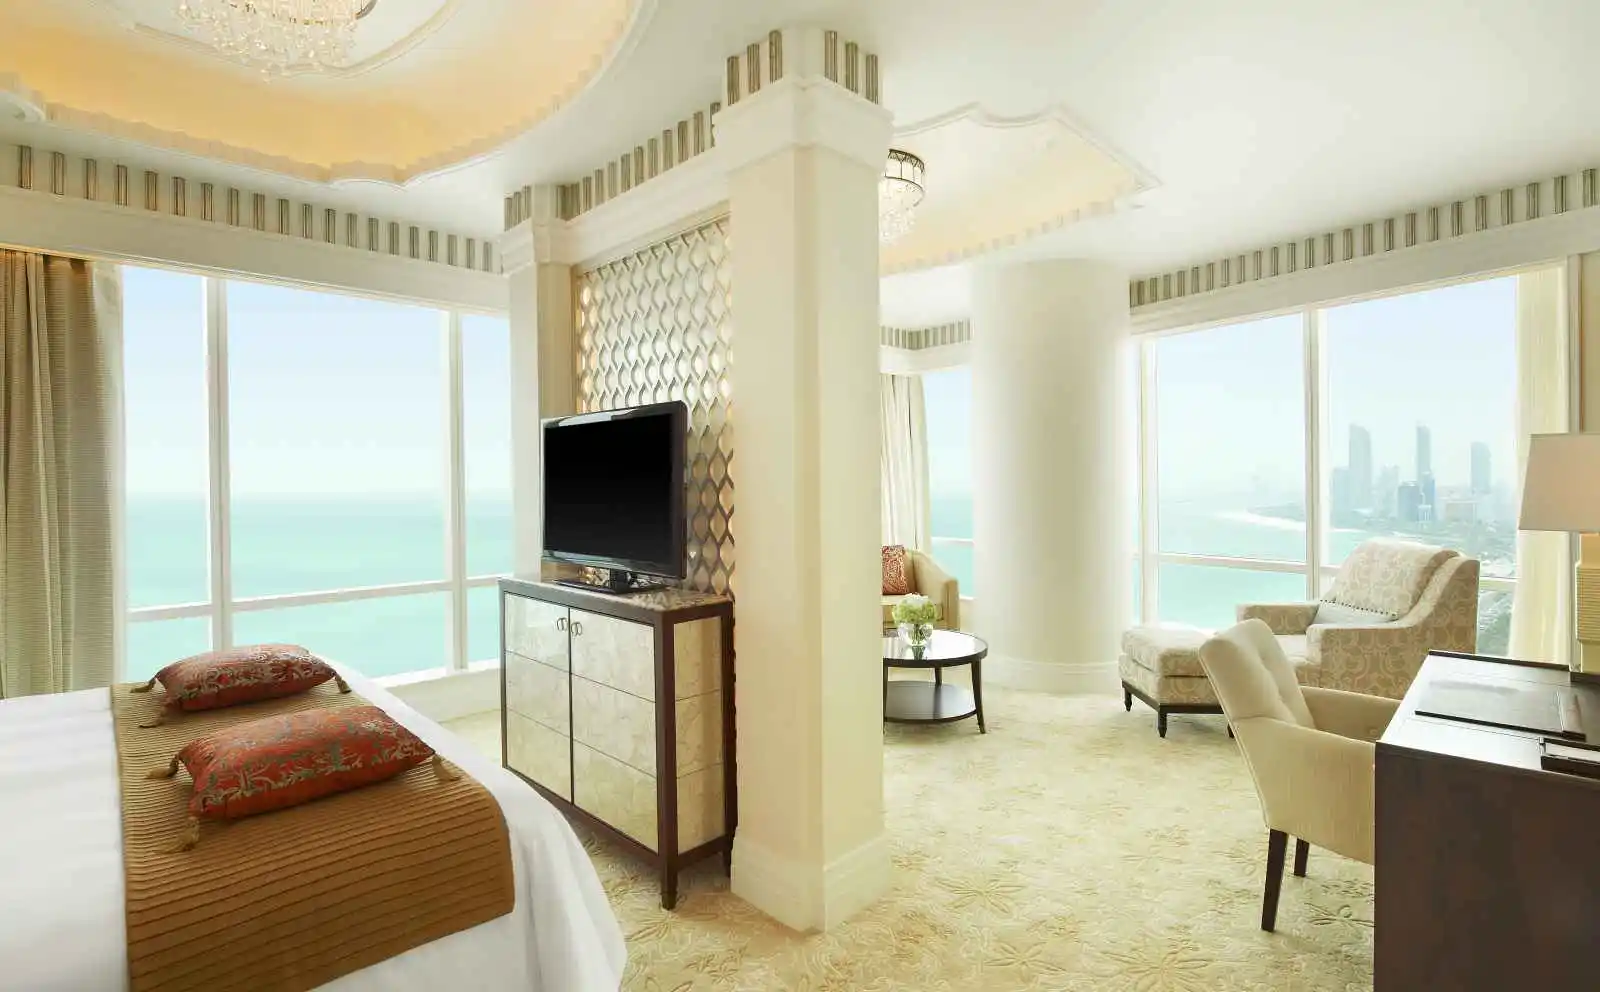 Grand Deluxe Suite, The St. Regis, Abou Dhabi